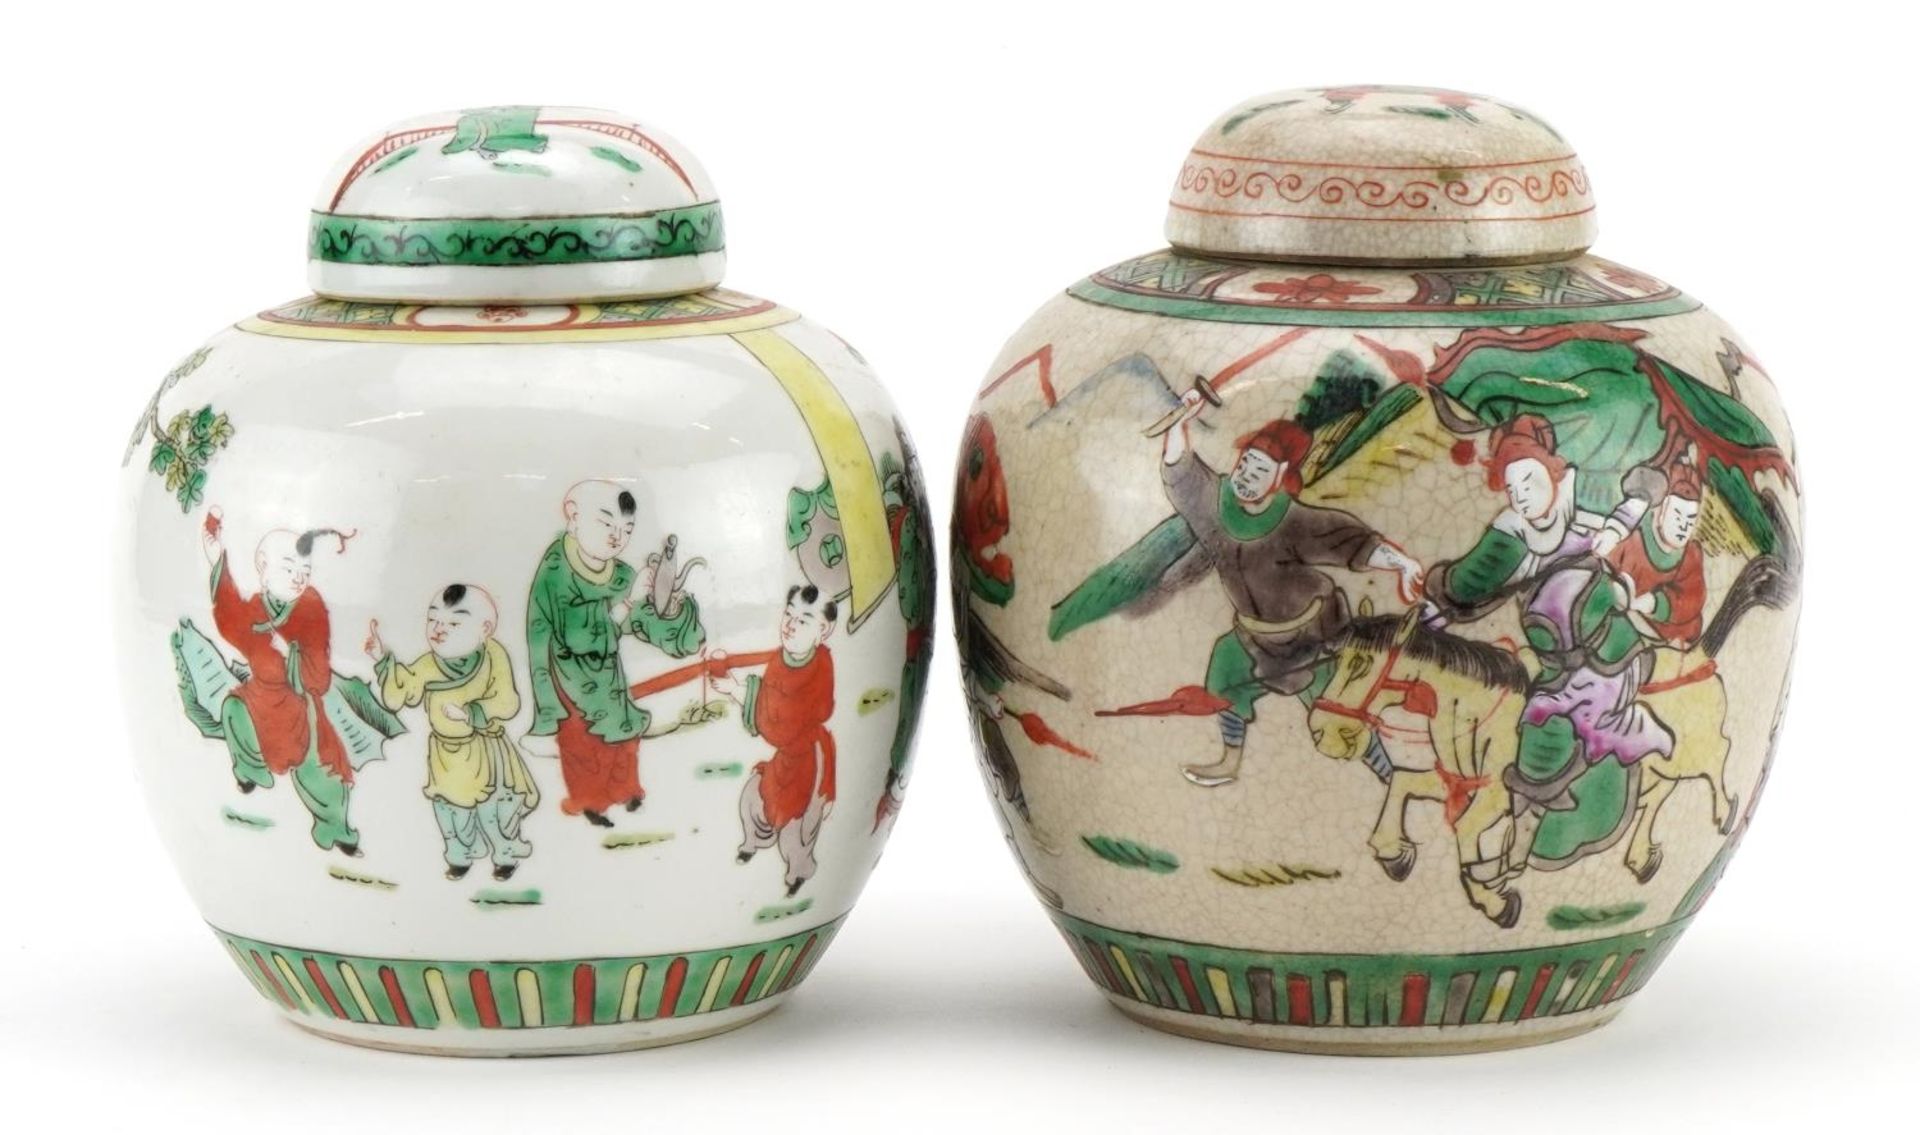 Two Chinese porcelain crackle glazed ginger jars with covers hand painted in the famille verte